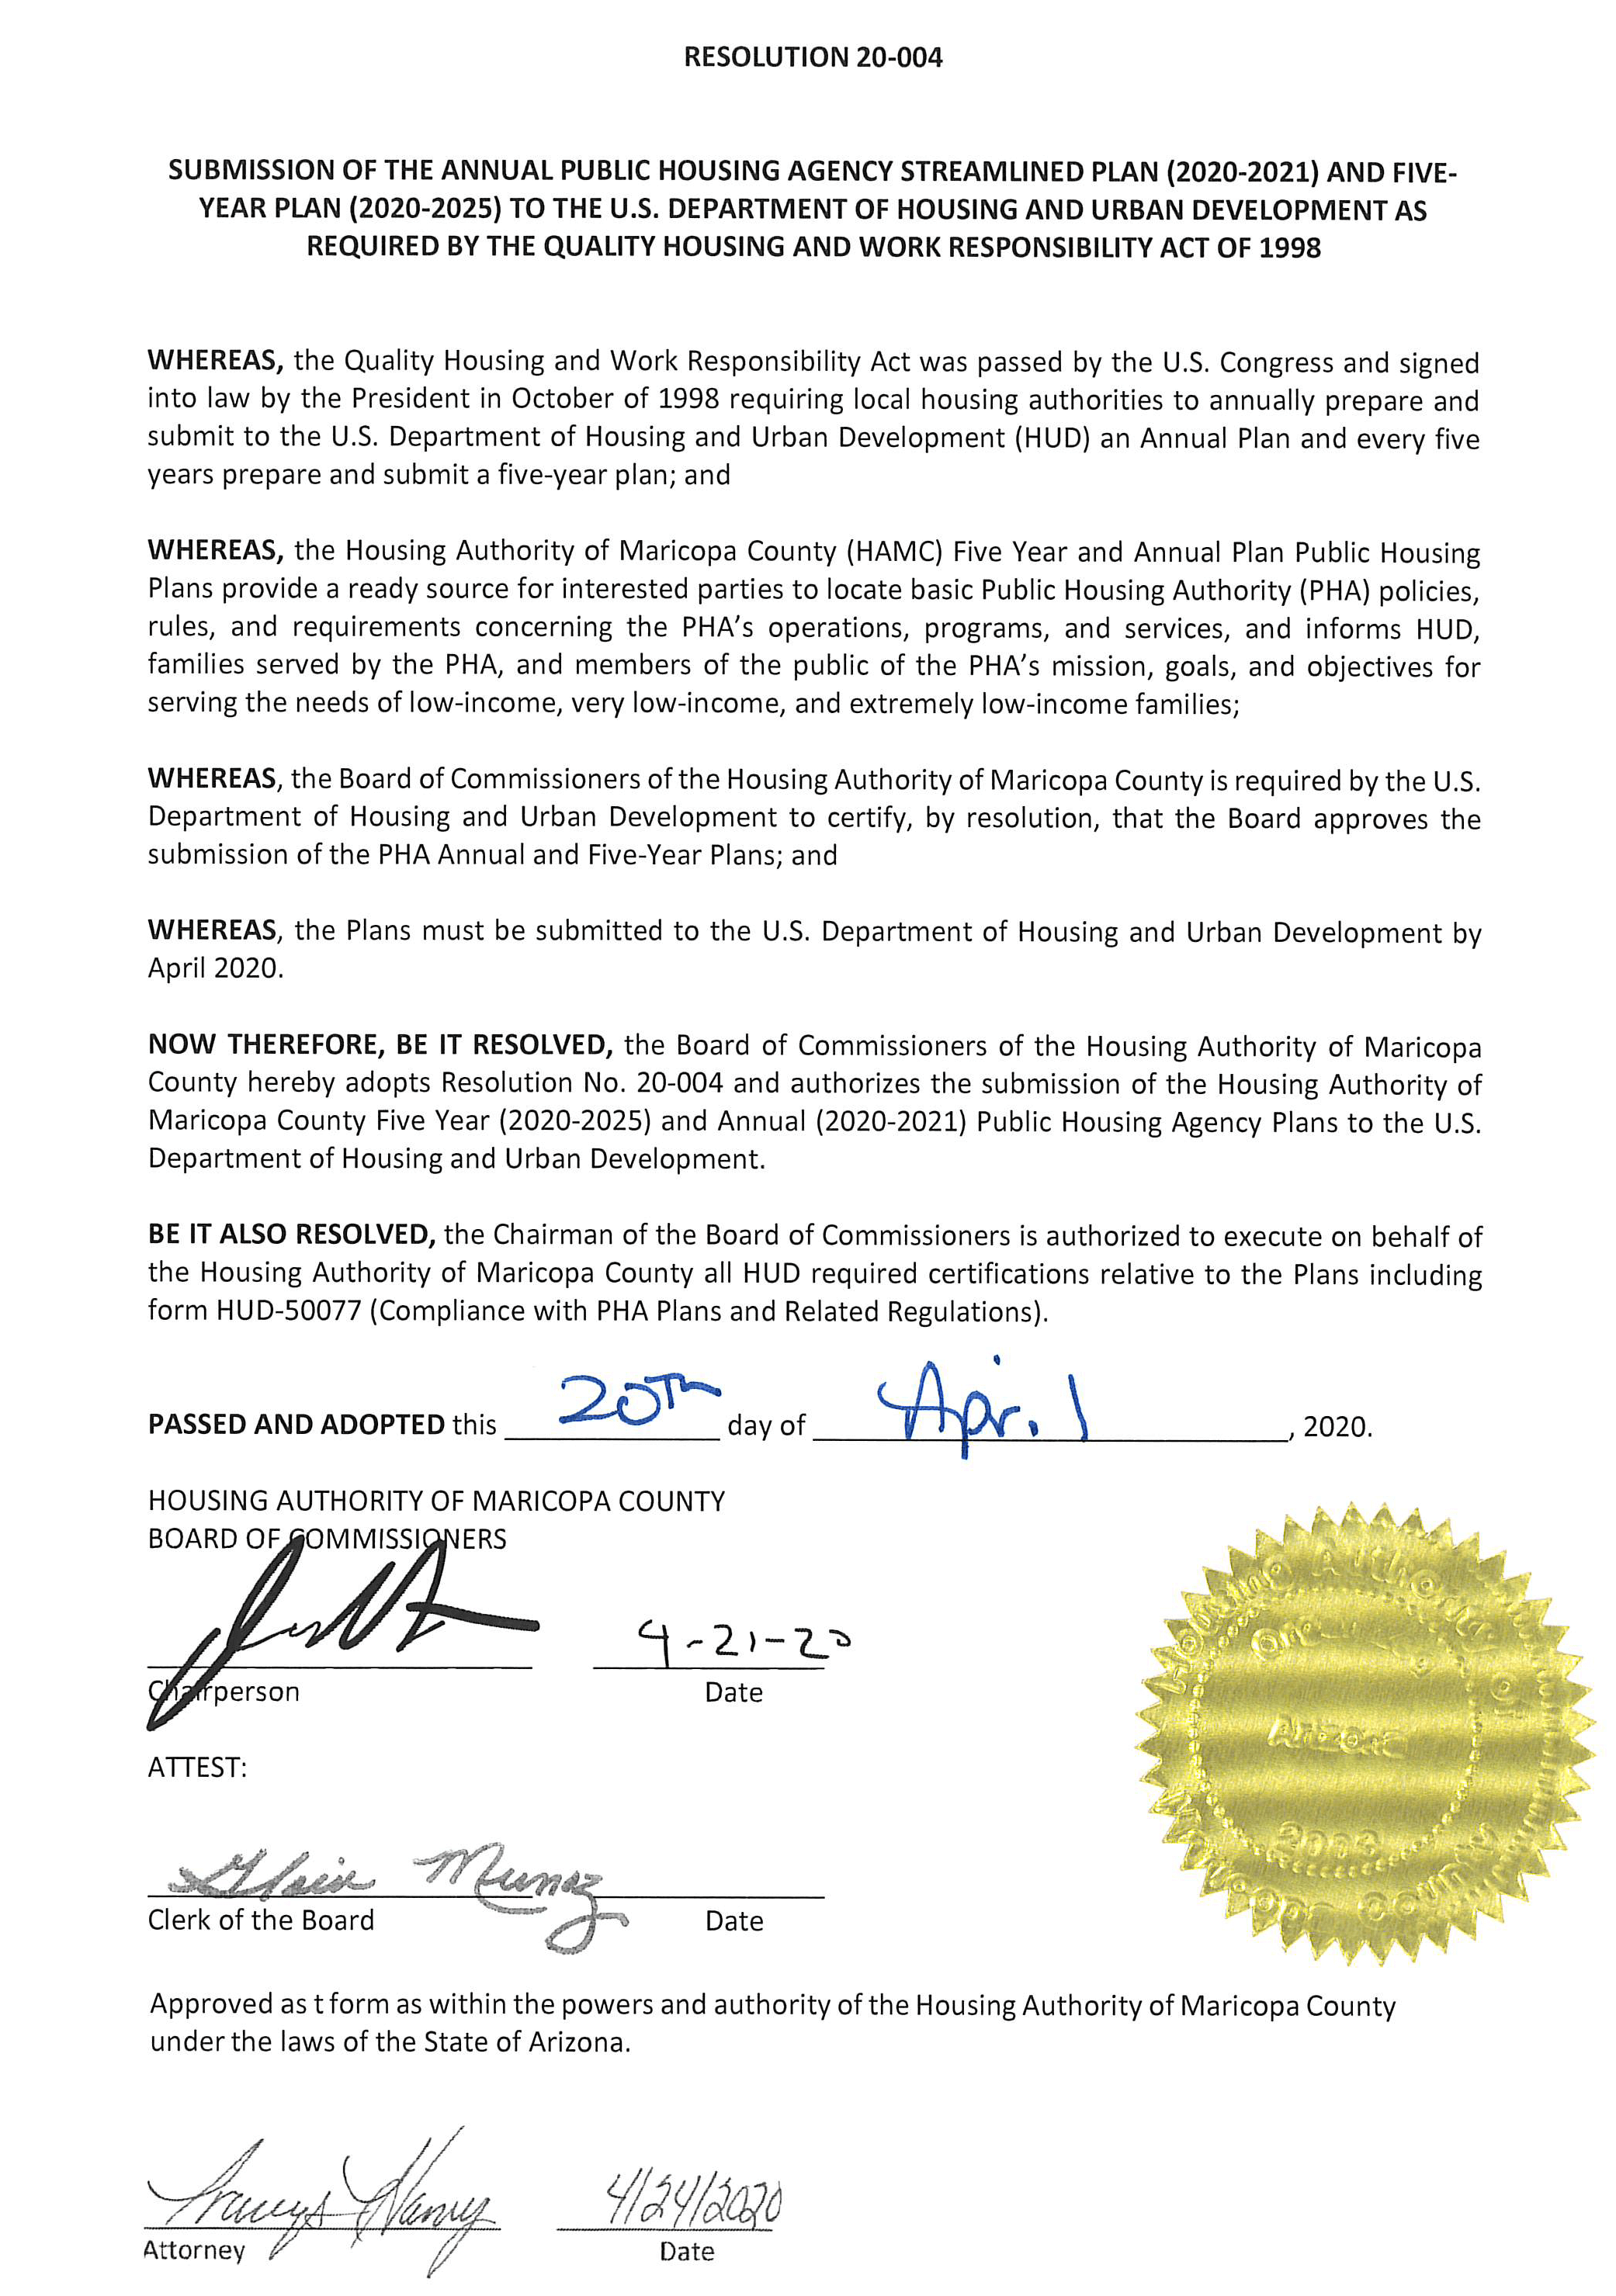 Resolution 20-004 certificate signed April 20th, 2020